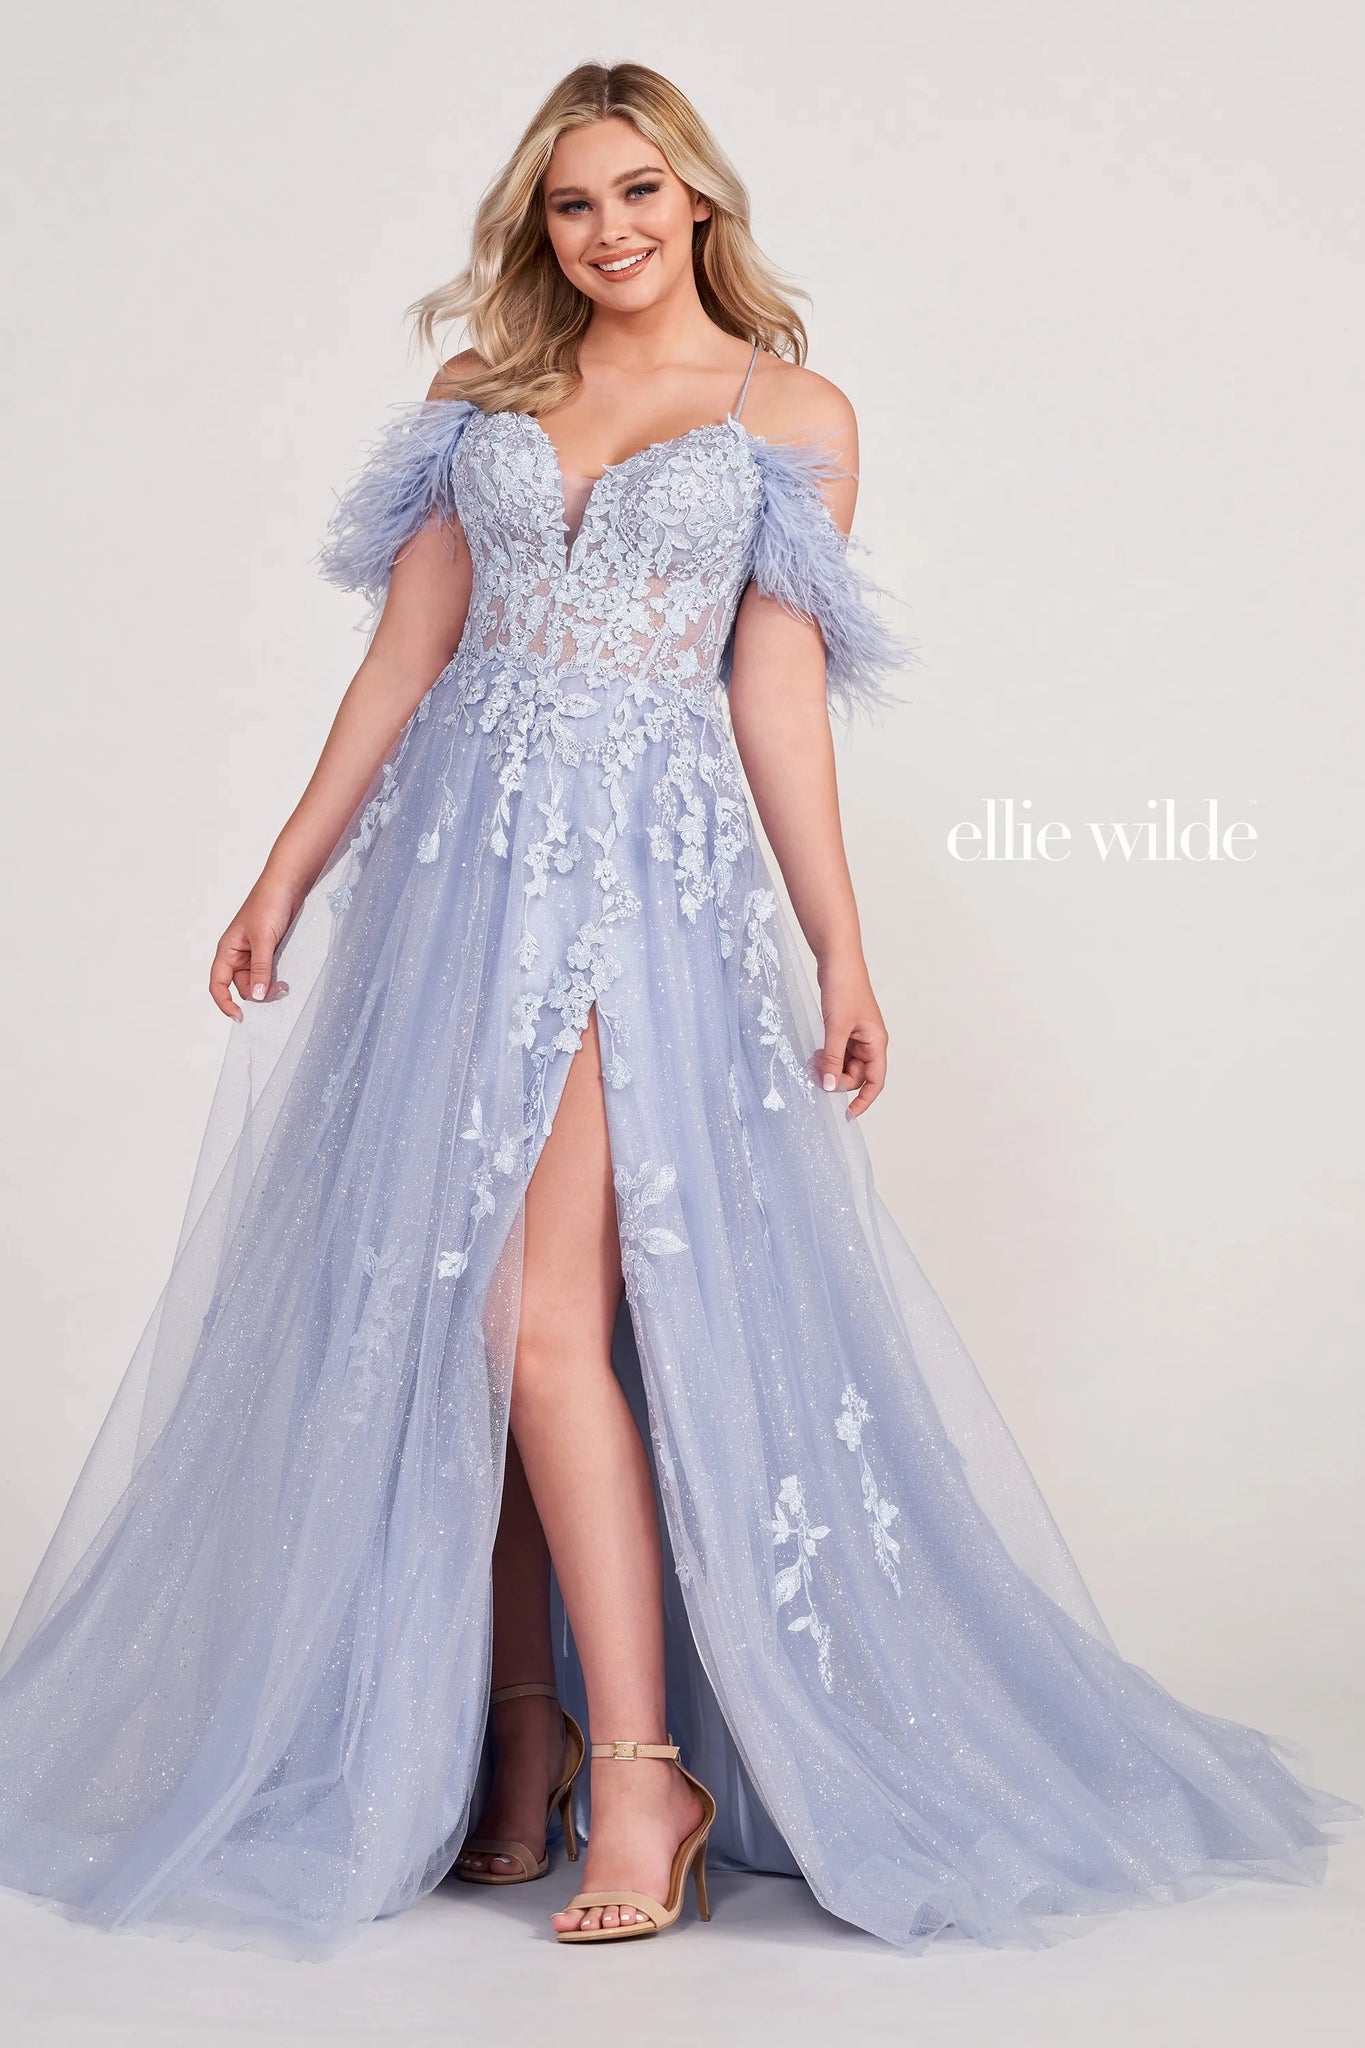 Be your own personal icon in phenomenal long dress EW34066 by Ellie Wilde. This dress grants you options with detachable off the shoulder feathered sleeves that give this dress an elegant touch. The fitted corset bodice features a plunging V neckline along with gorgeous appliques that make a striking transition onto the glittering tulle skirt. The skirt is completed with a thigh high slit and dramatic sweep train that will look stunning in photos.